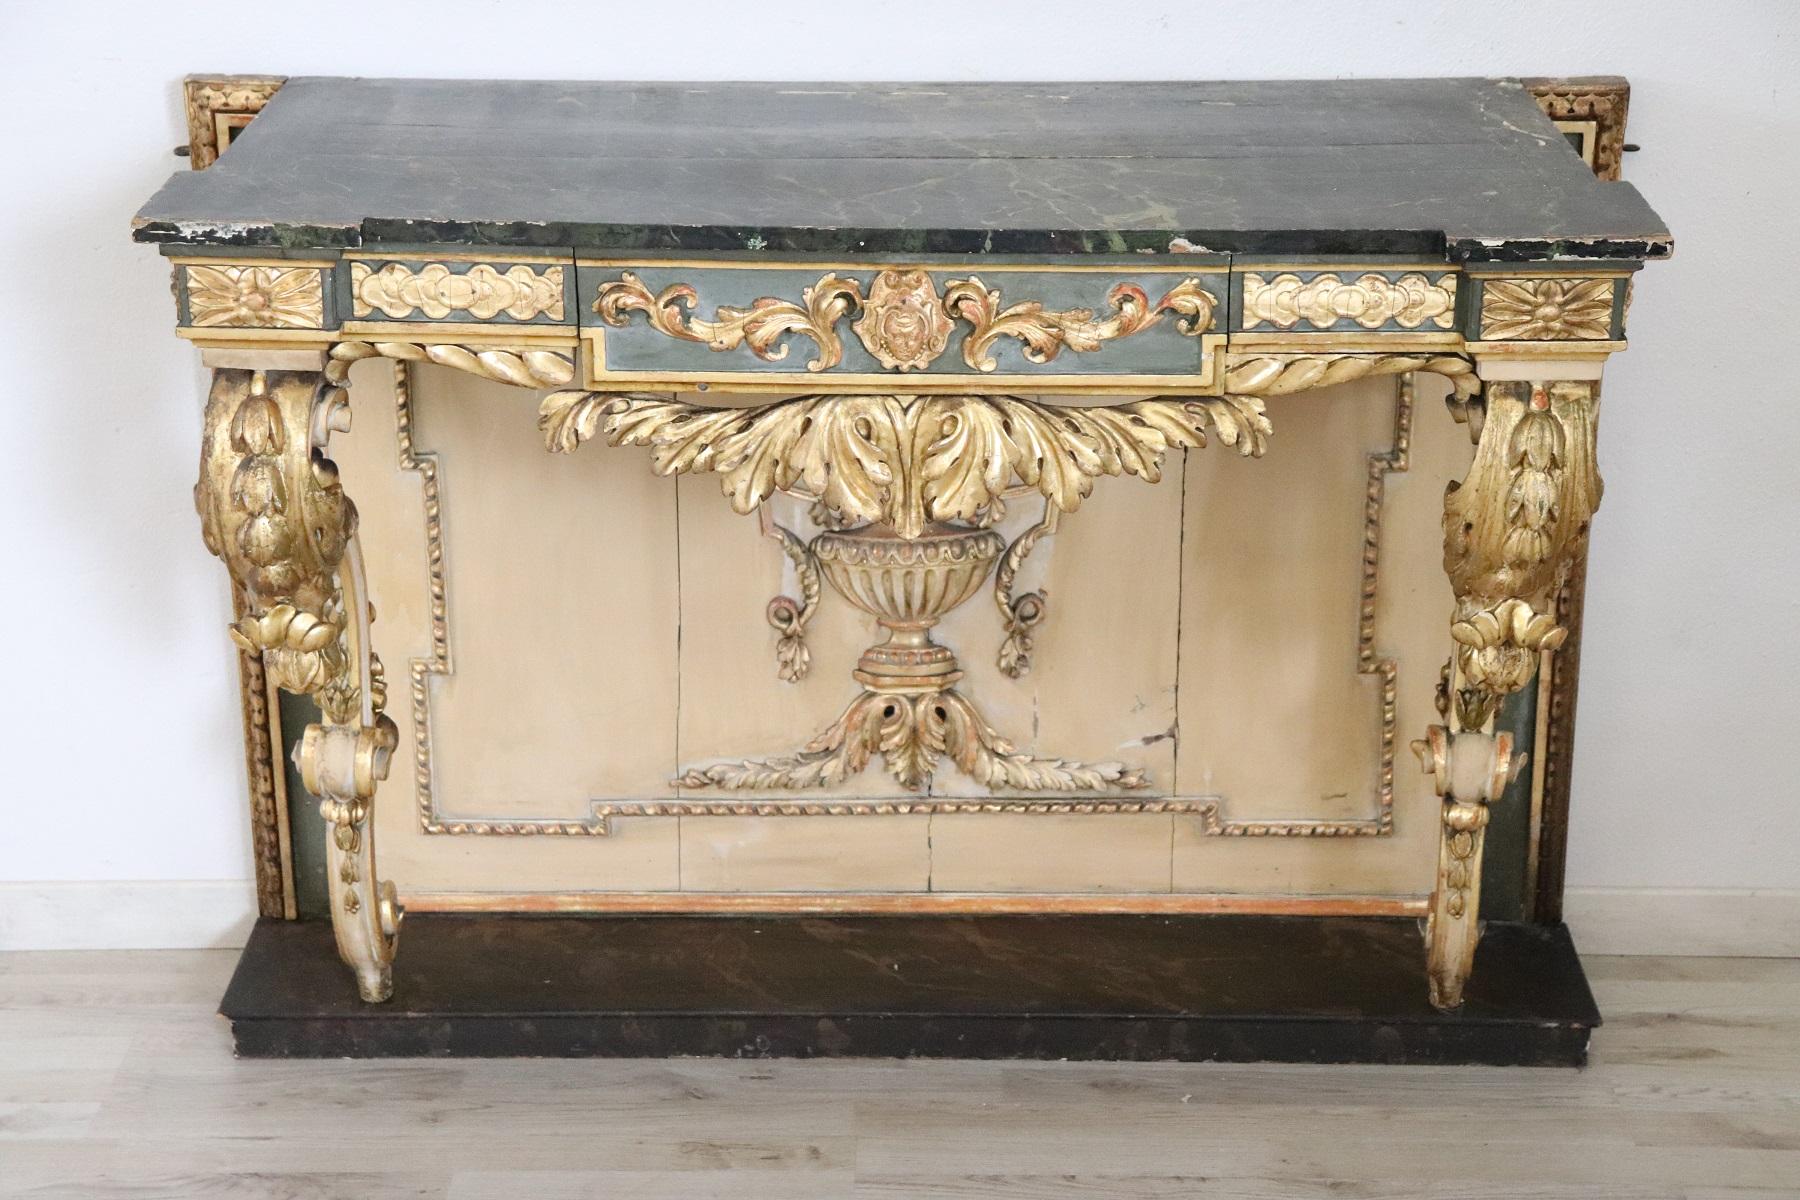 Italian antique console table, 1840. Characterized by precious lacquered and gilded. The top is made of a faux marble painted decoration. The wood is finely decorated with carving with moved front legs. Many decorative elements of classic taste look